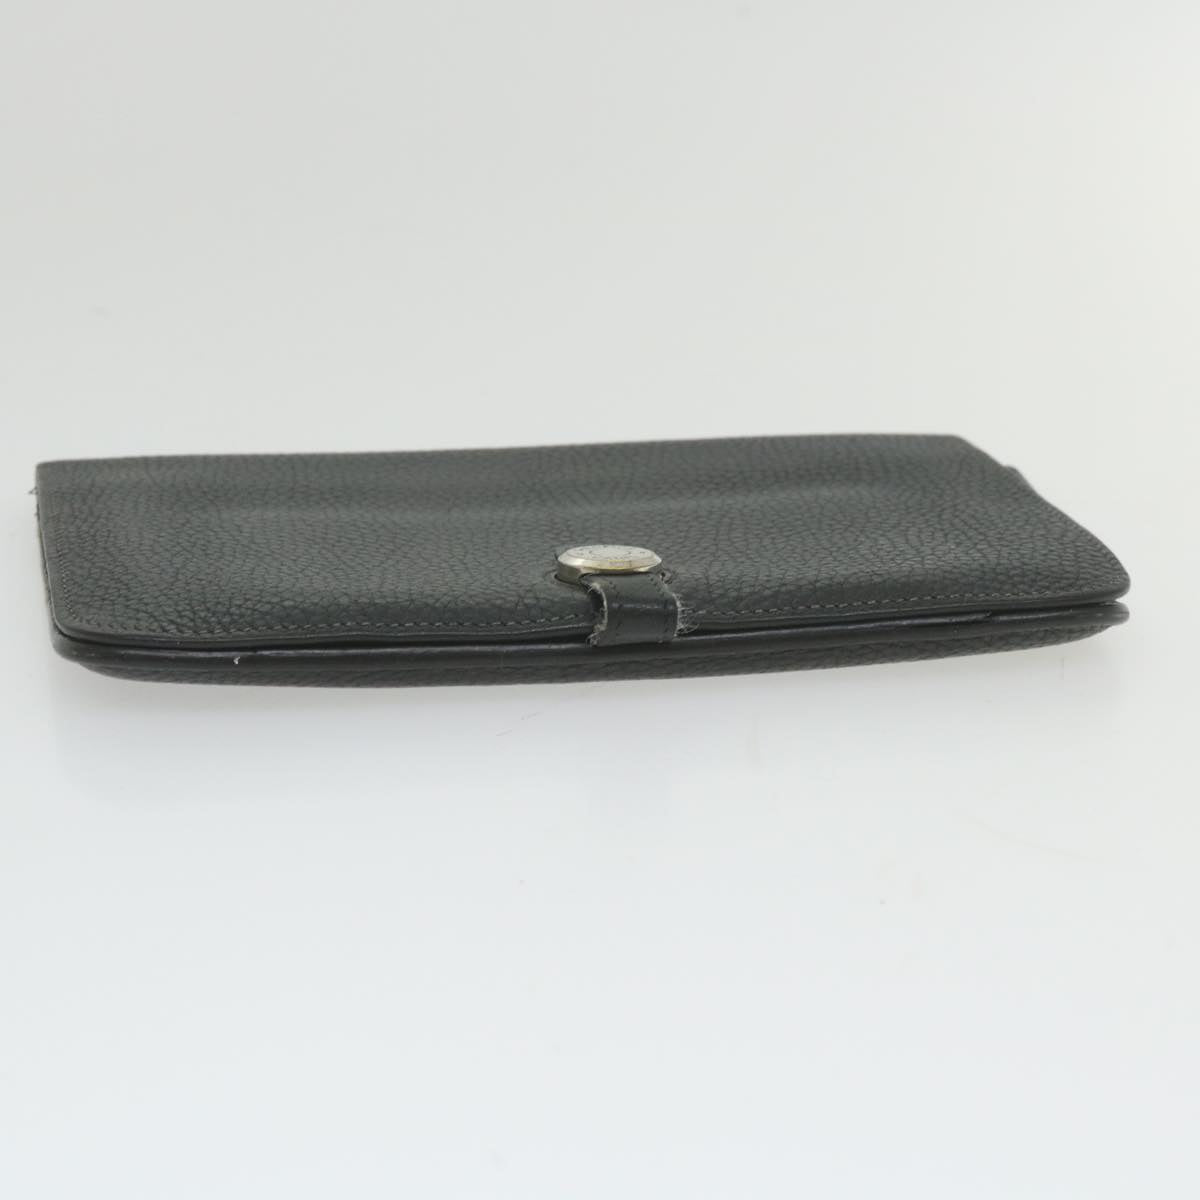 HERMES Dogon GM Wallet Leather Black Auth ep2334